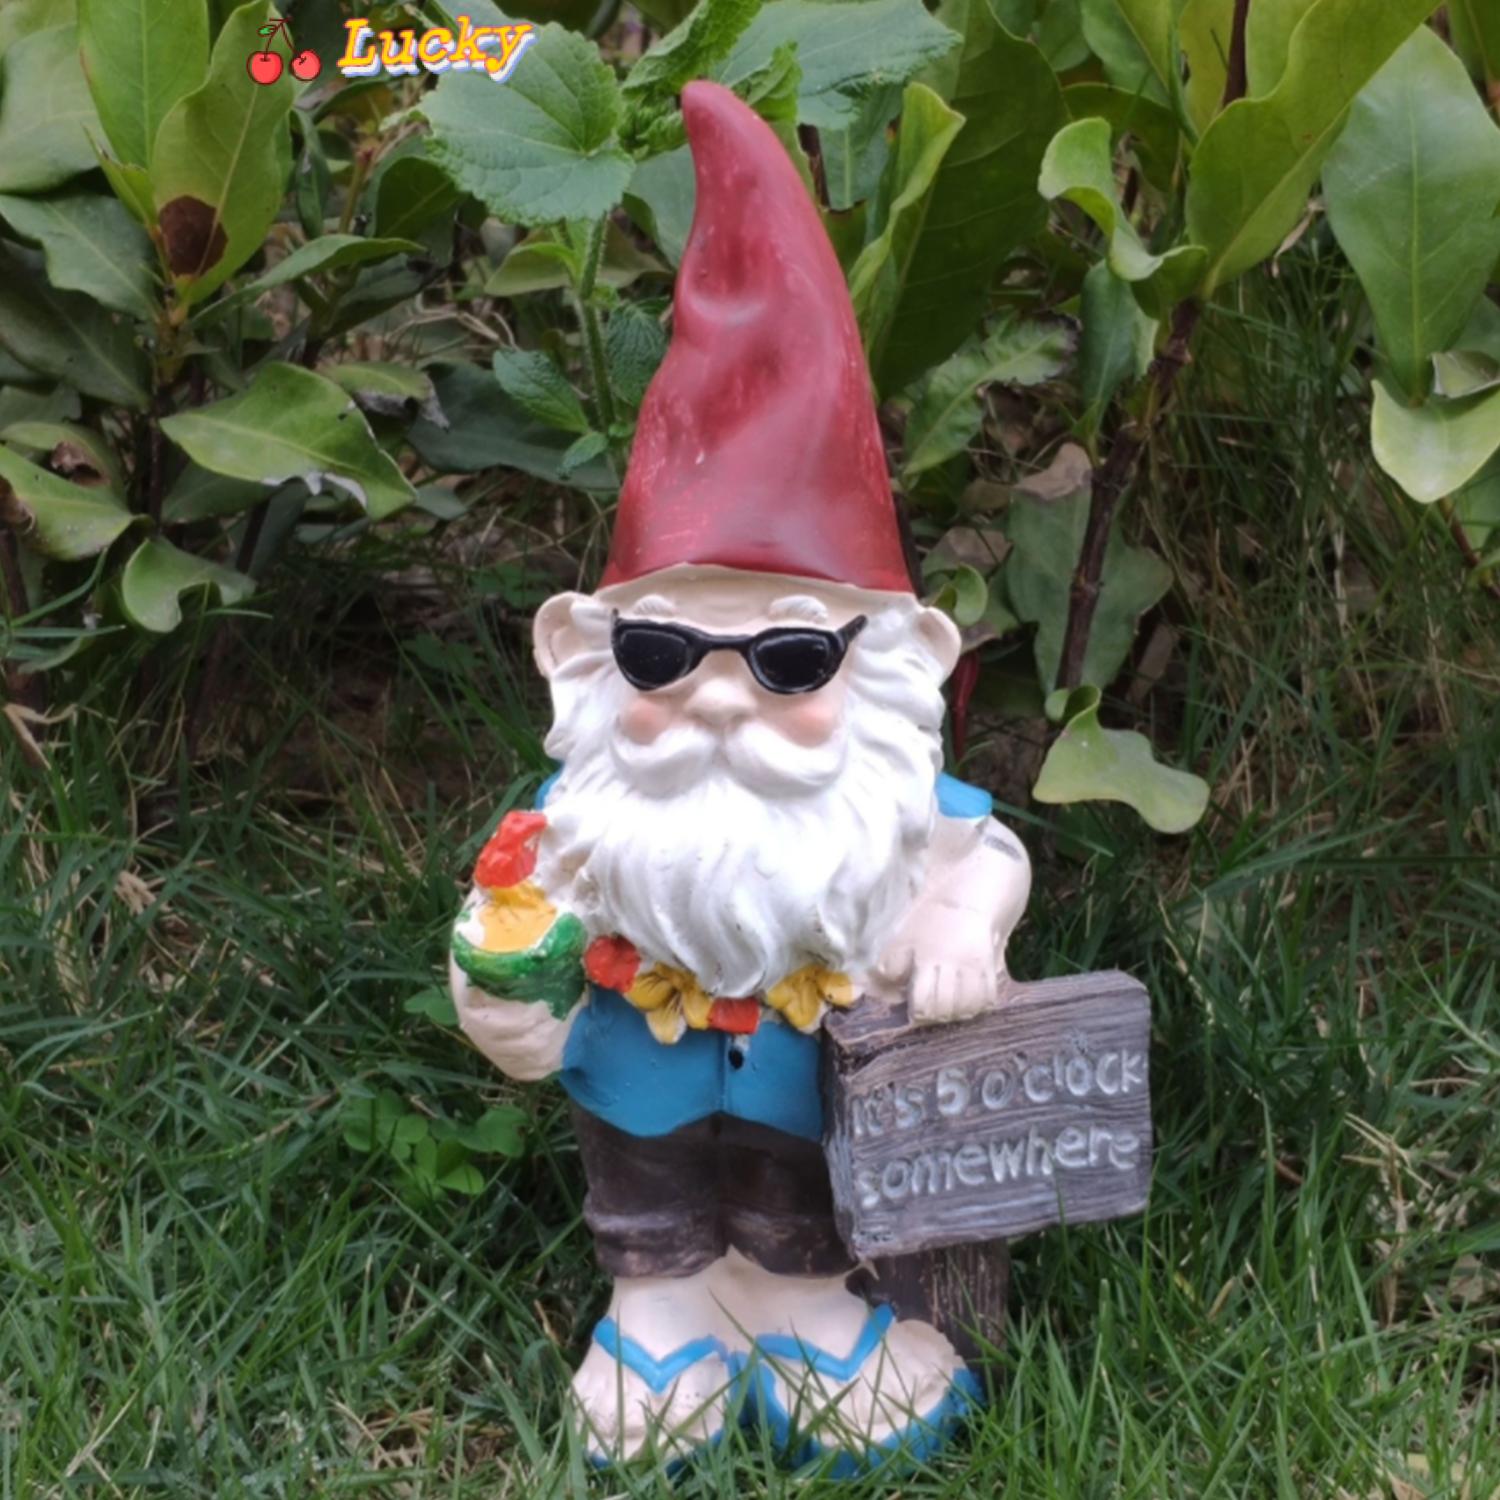 LUCKY Beach Gnome Figurine Sculpture Polyresin Statue Garden Gnome Statue Garden Decor Resin for Patio Yard Lawn Pond Summer It's 5 O'clock Somewhere